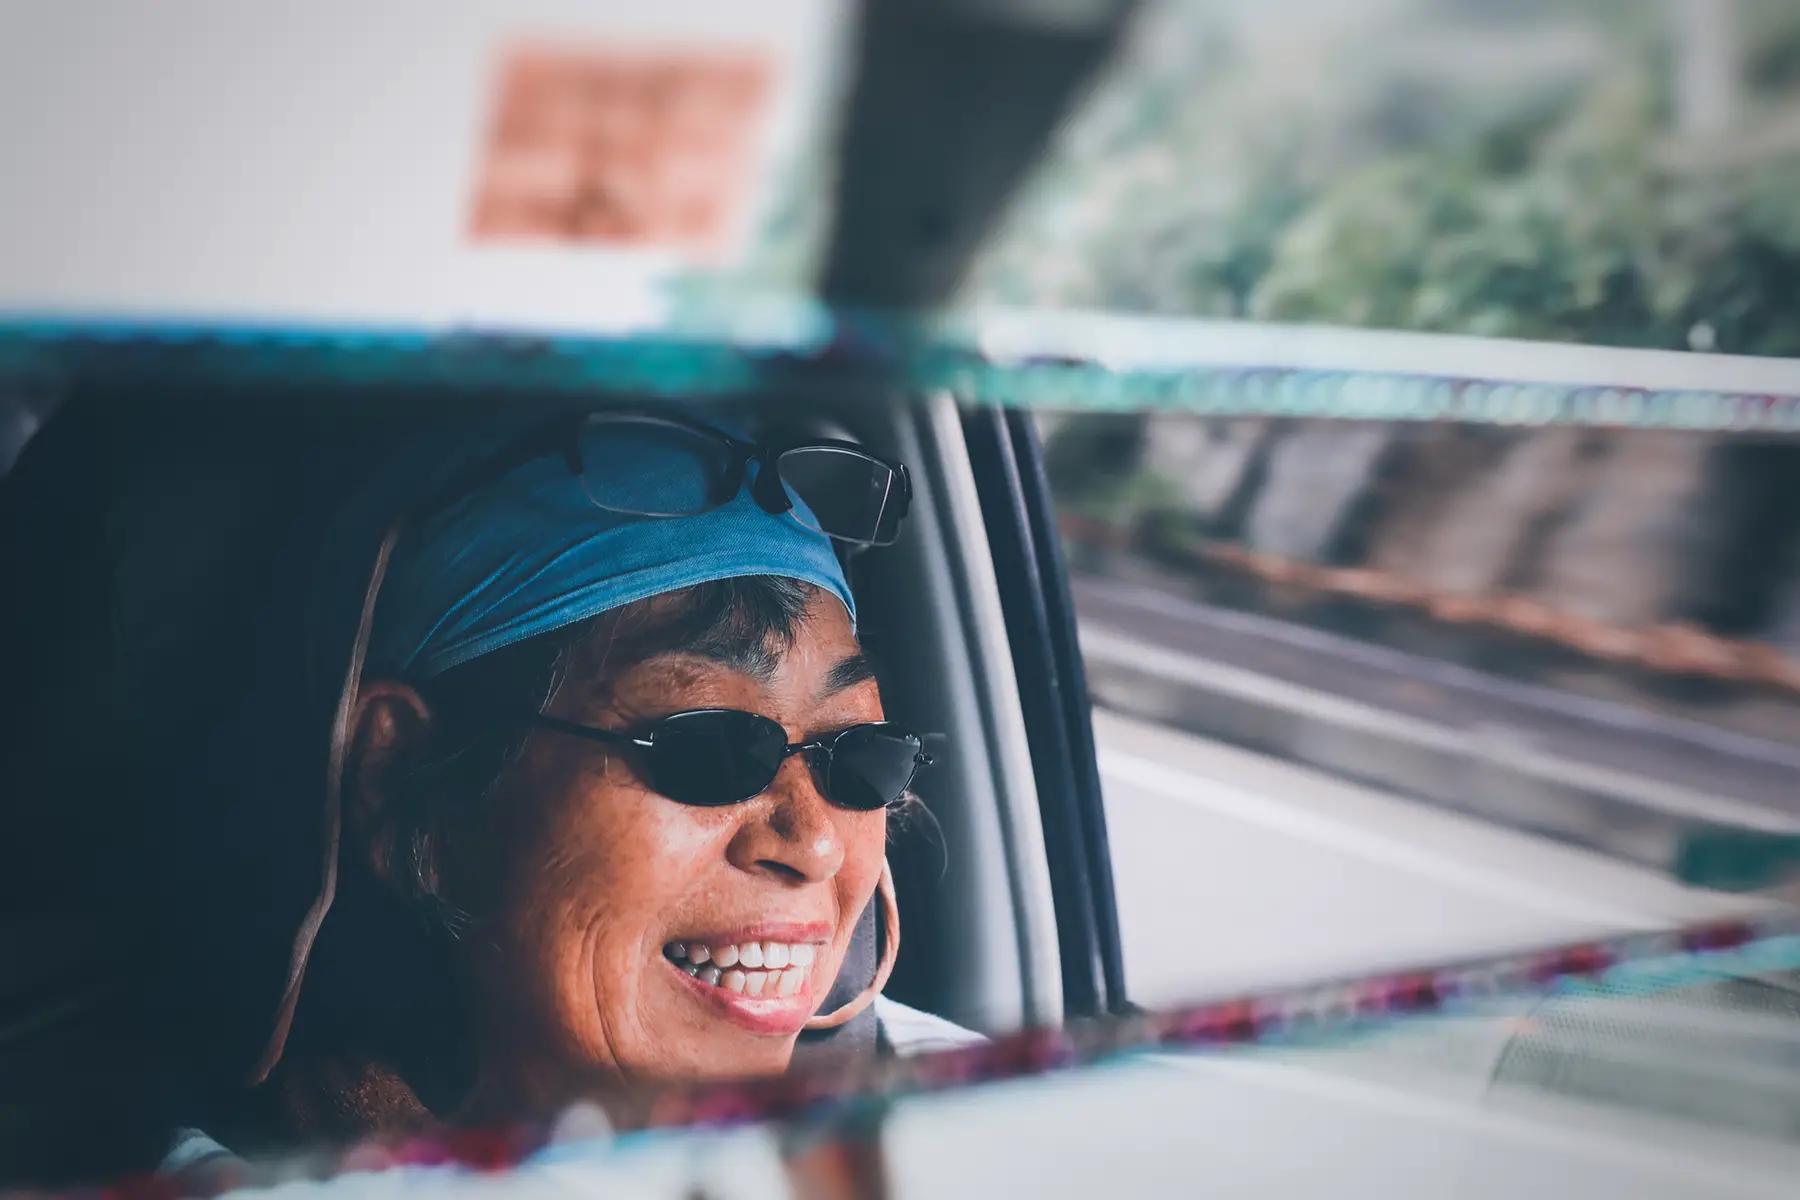 The reflection of a woman smiling in her rearview mirror while driving